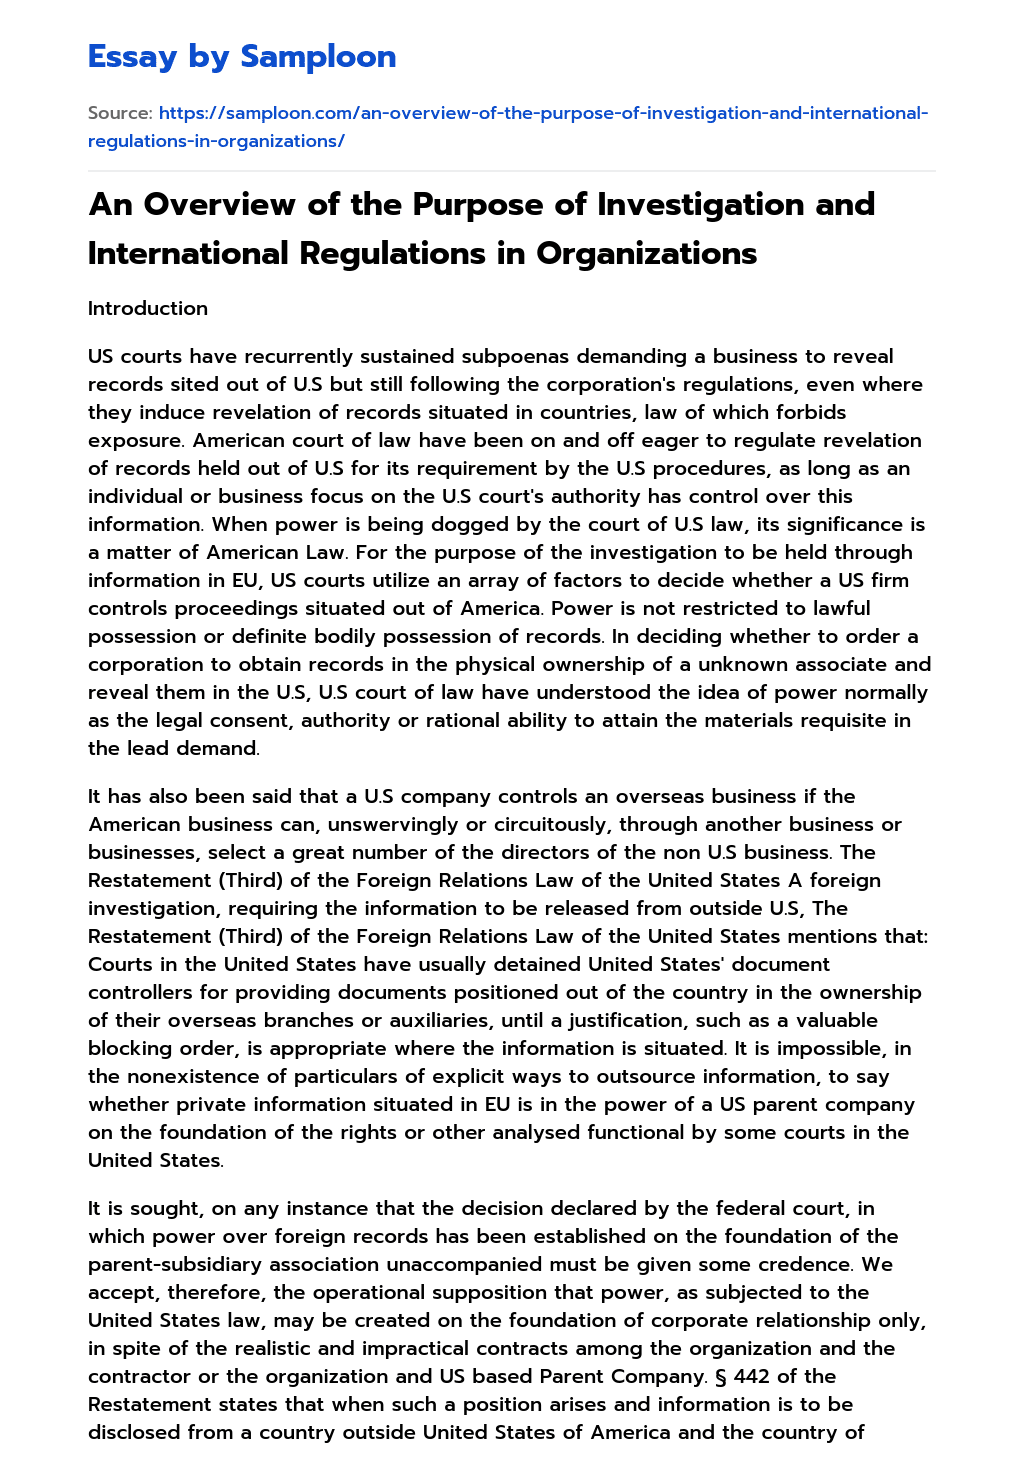 An Overview of the Purpose of Investigation and International Regulations in Organizations essay